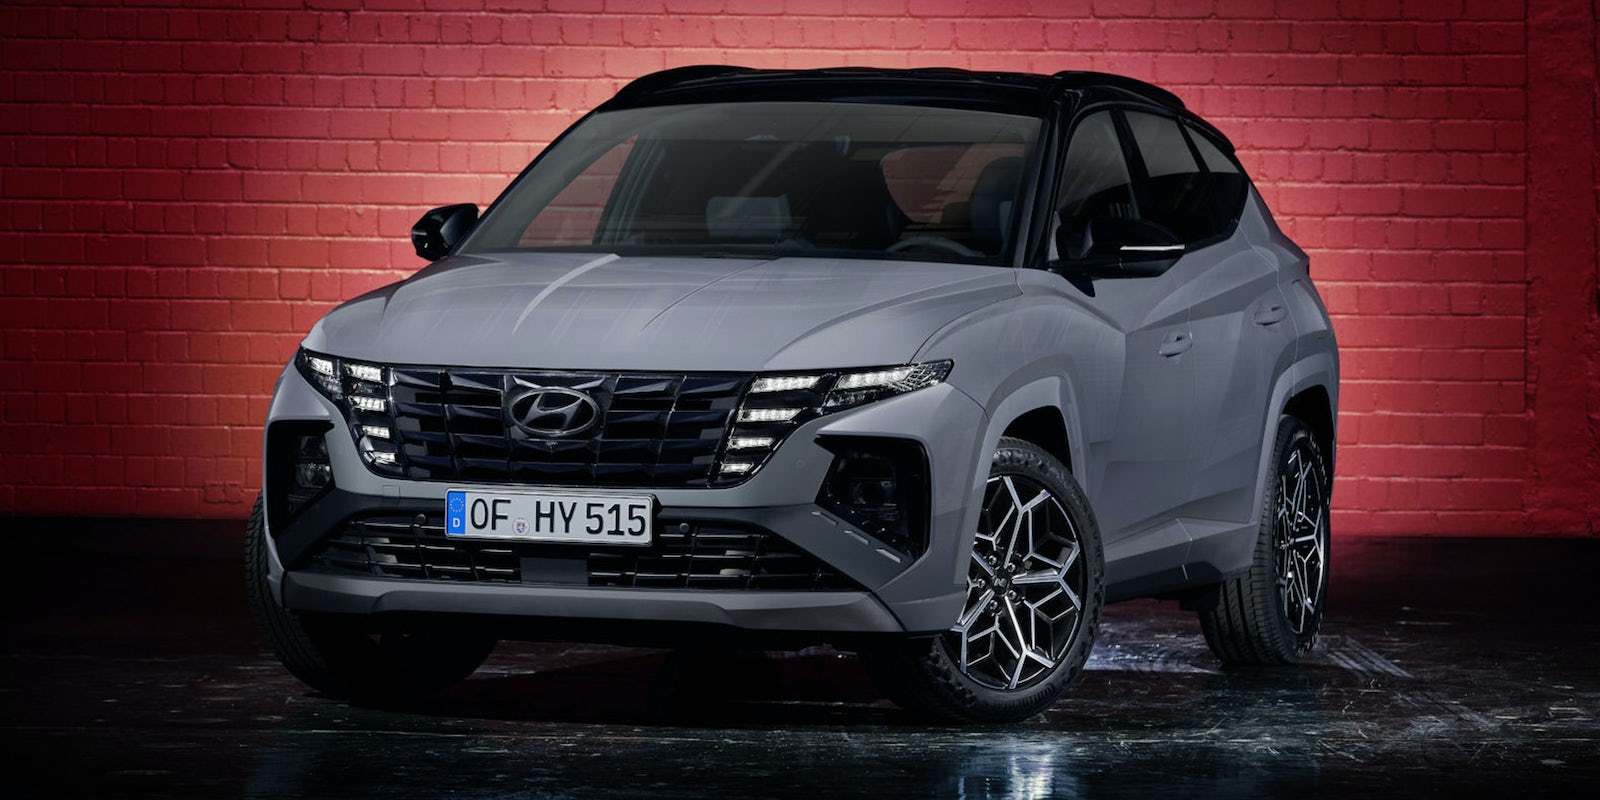 2021 Hyundai Tucson N Line revealed: price, specs and release date | carwow